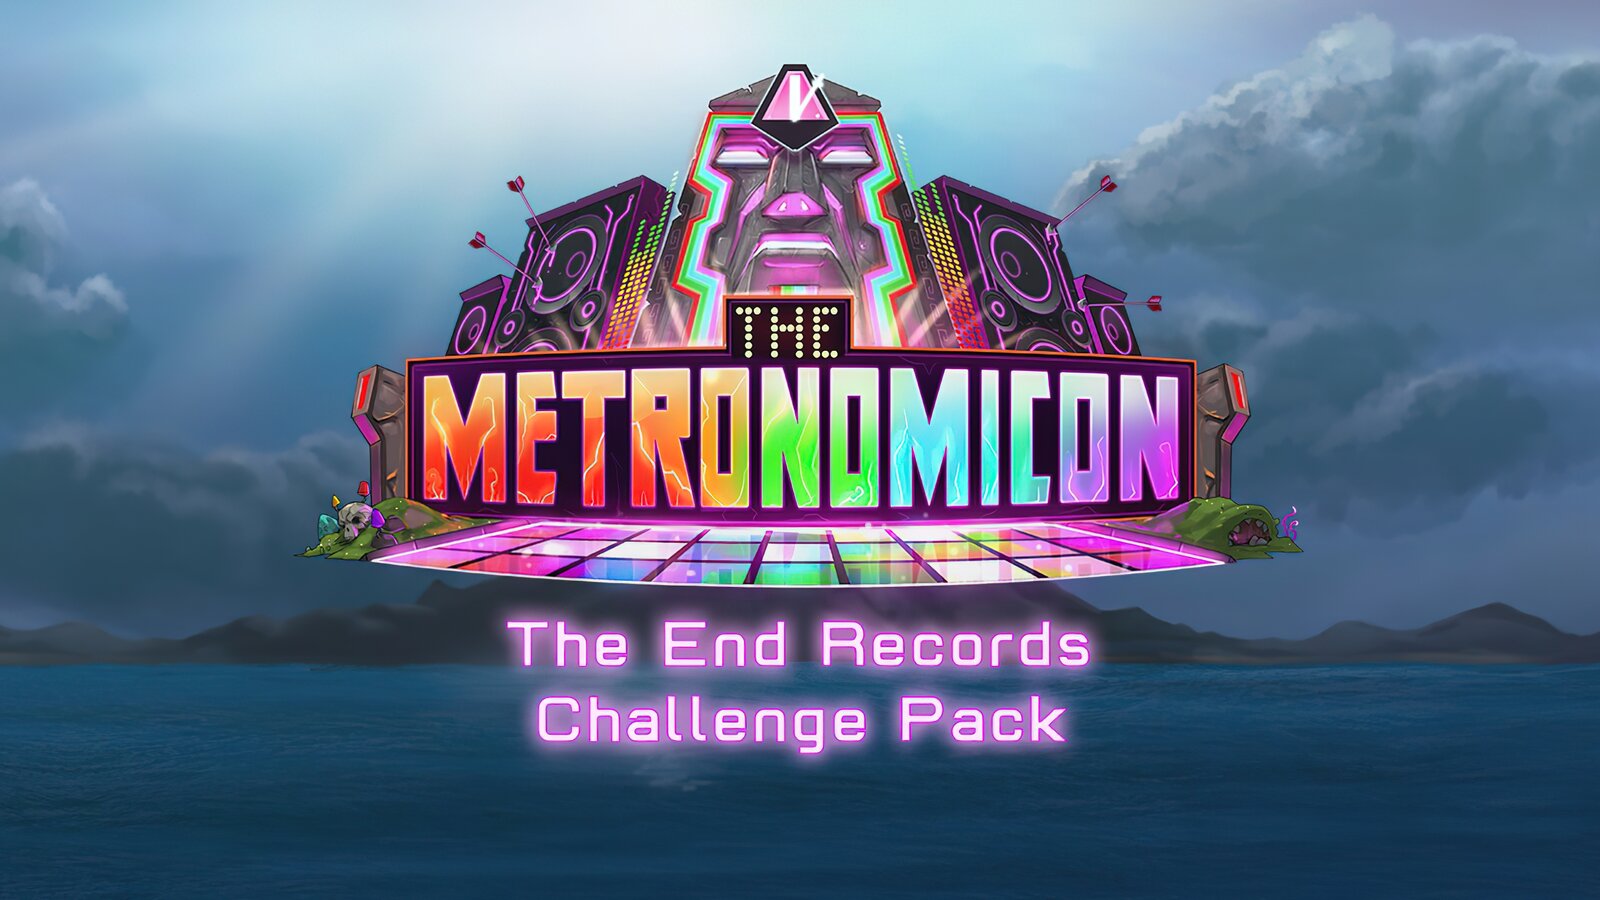 The Metronomicon – The End Records Challenge Pack